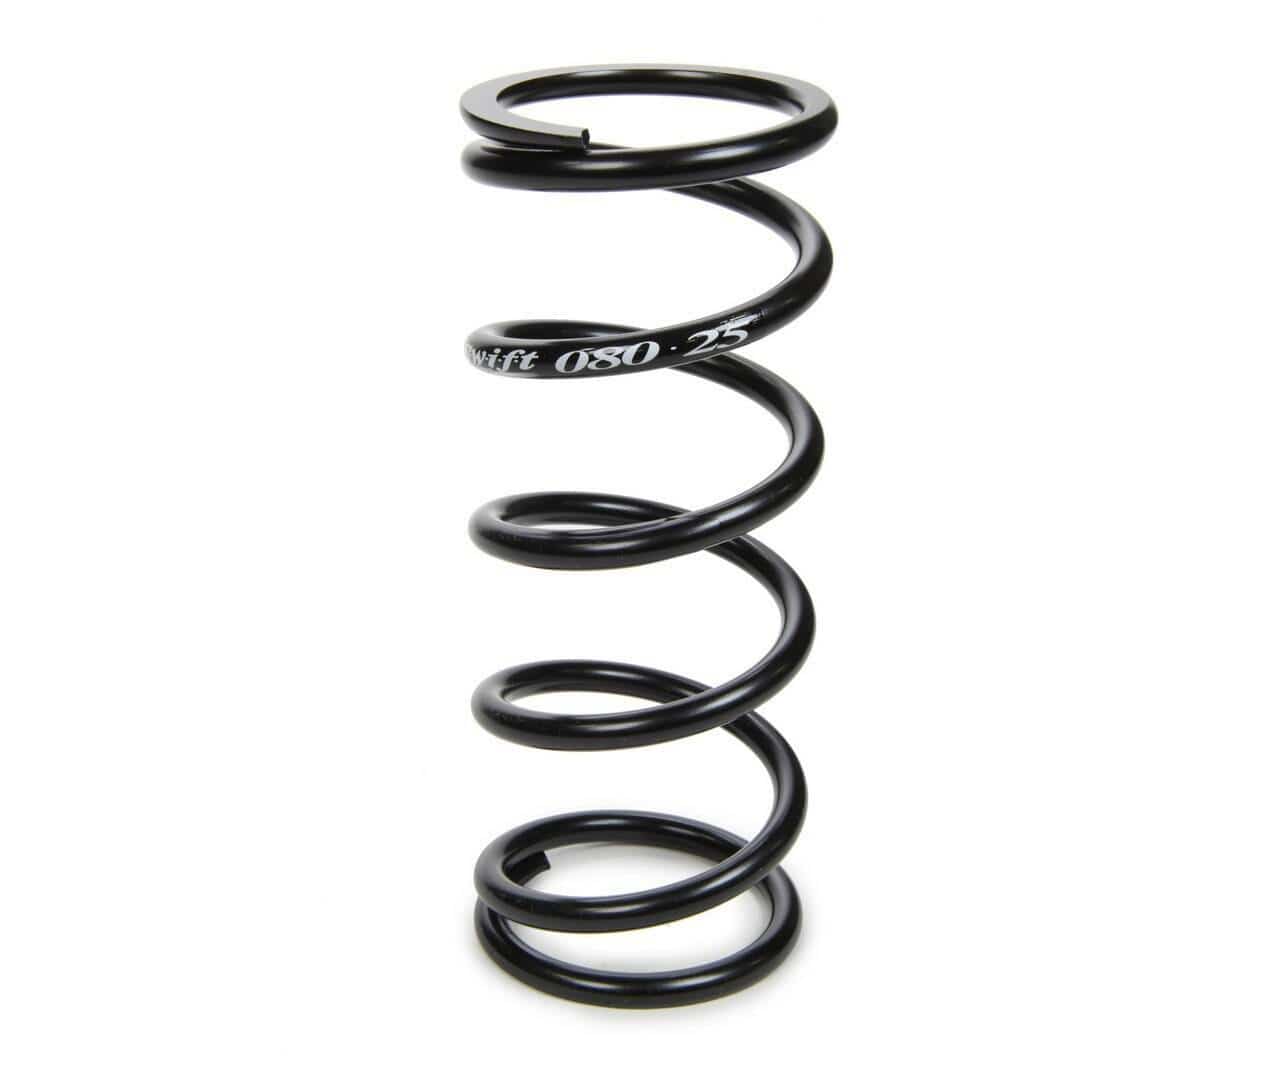 Swift Springs Standard Coilover Spring (Barrel Type) - ID 2.5", 10" Length